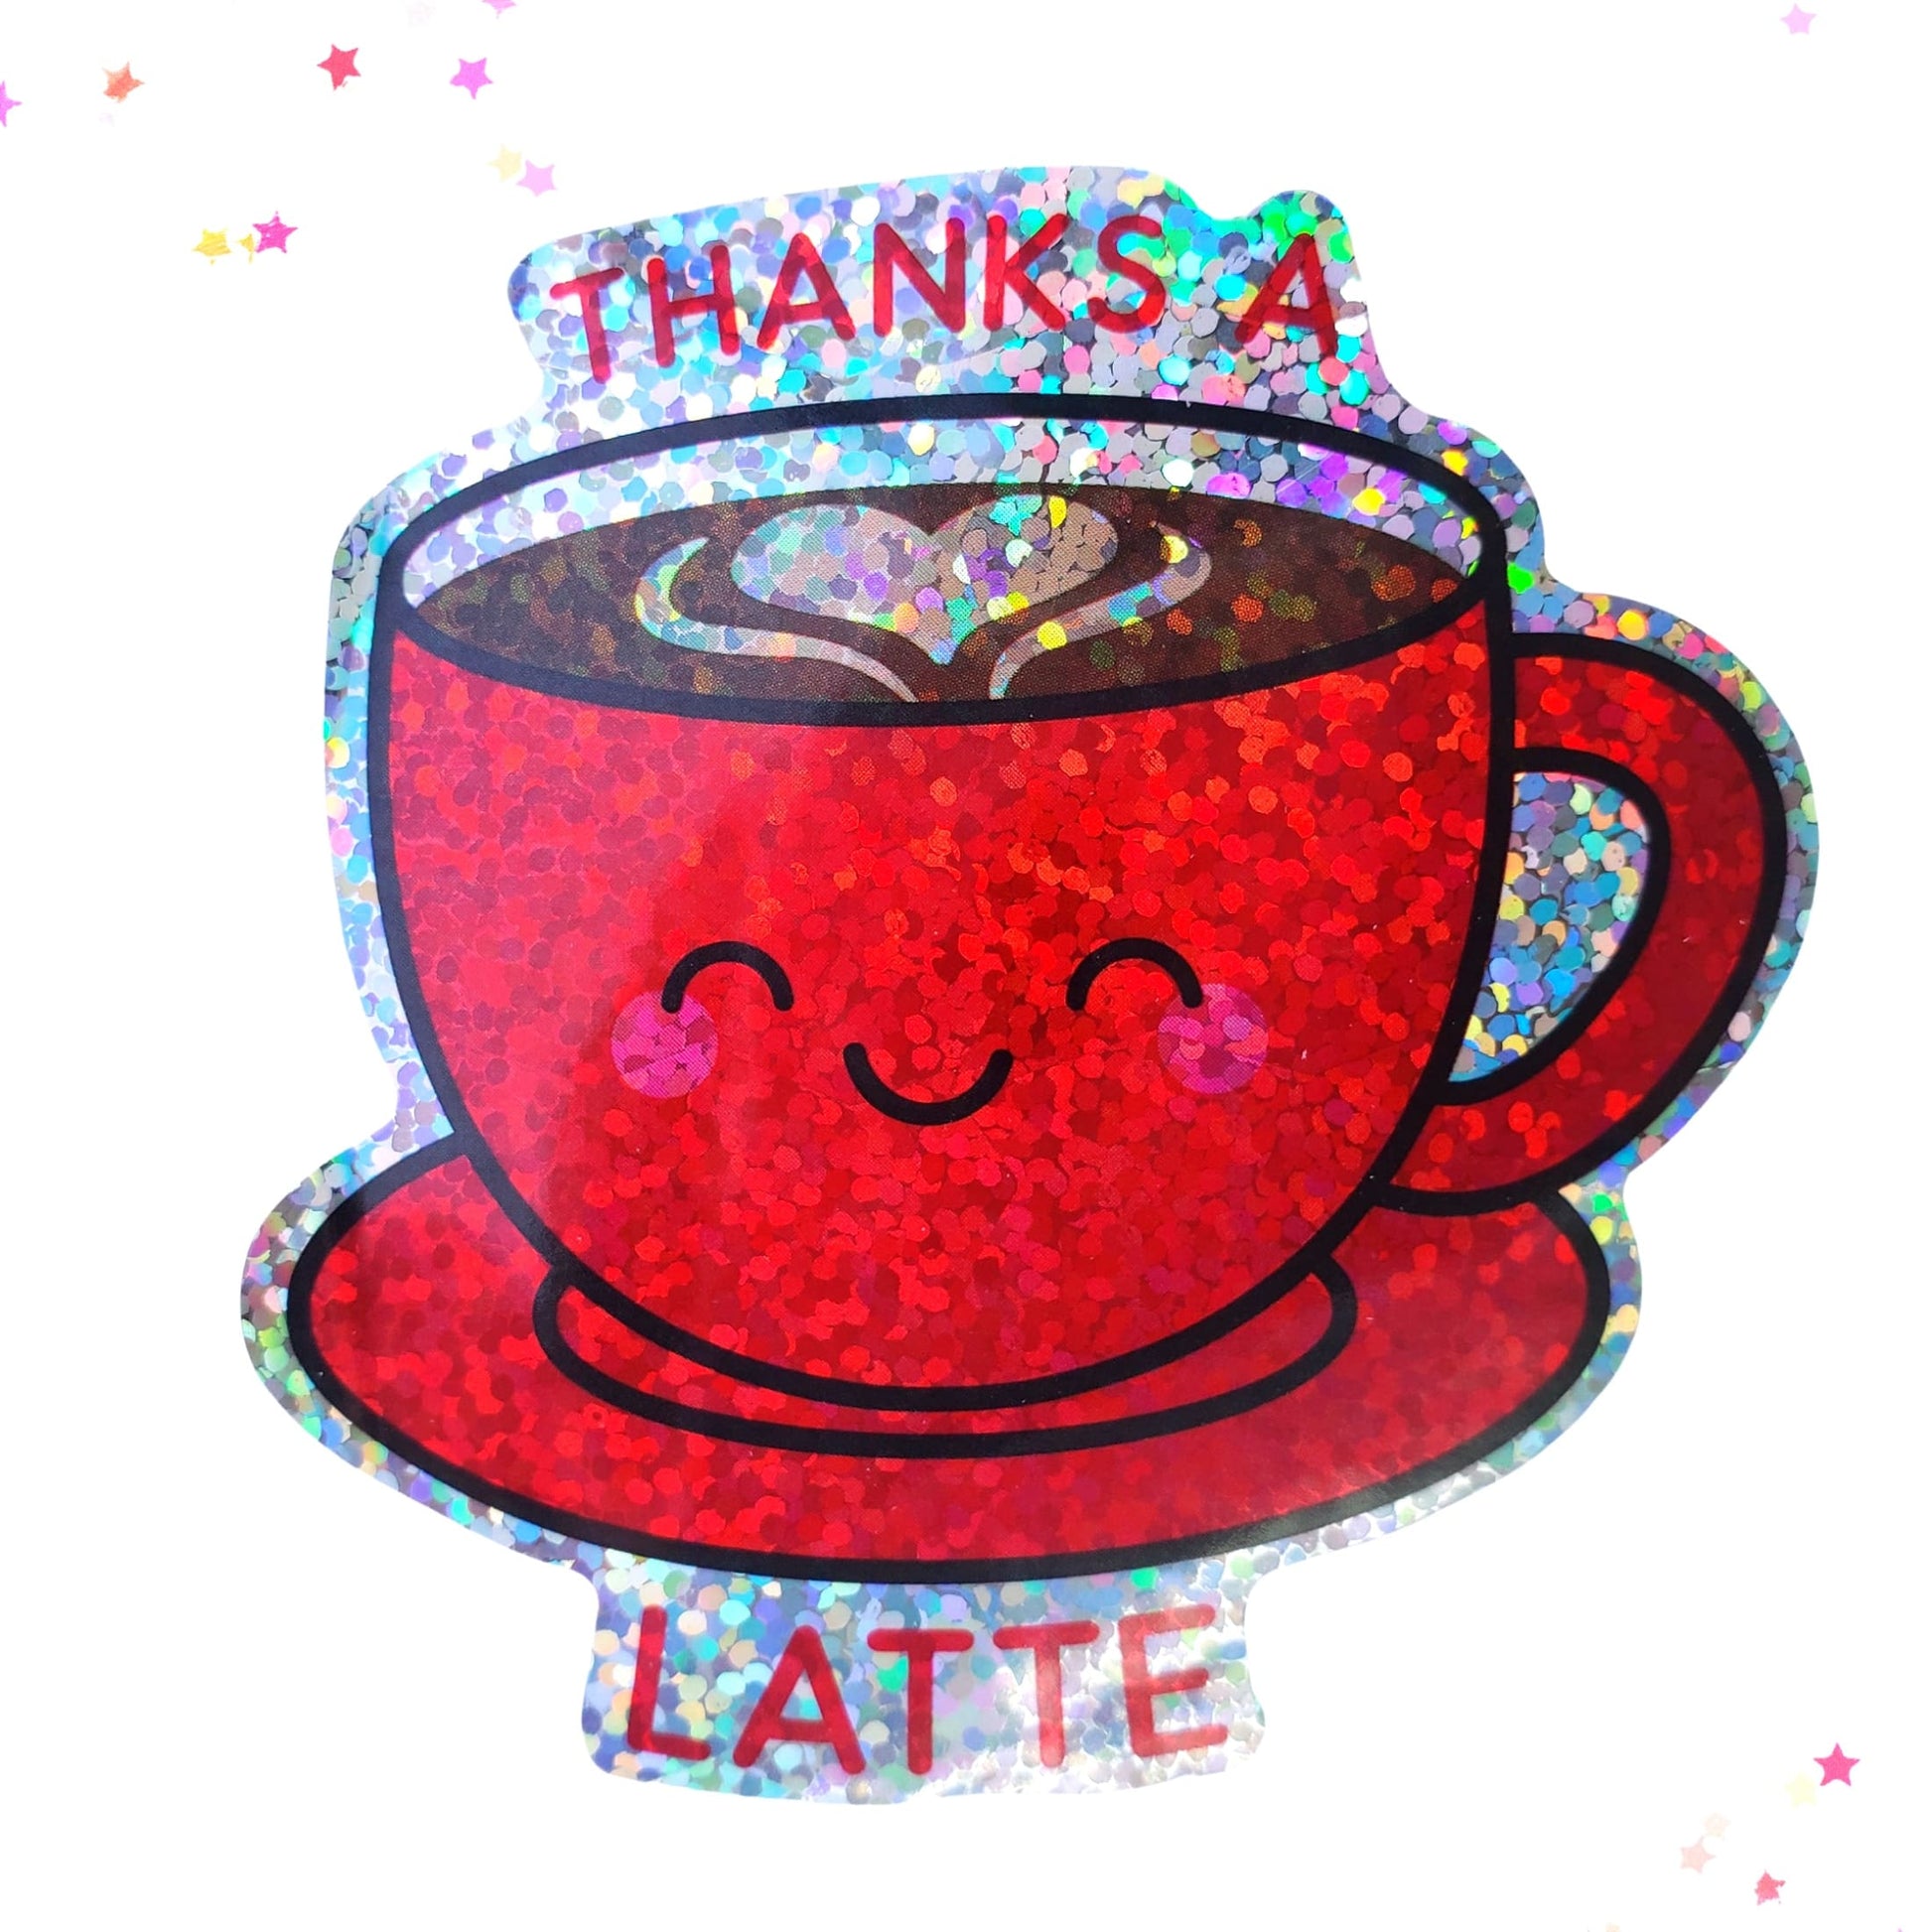 Premium Sticker - Sparkly Holographic Glitter Thanks A Latte from Confetti Kitty, Only 2.00